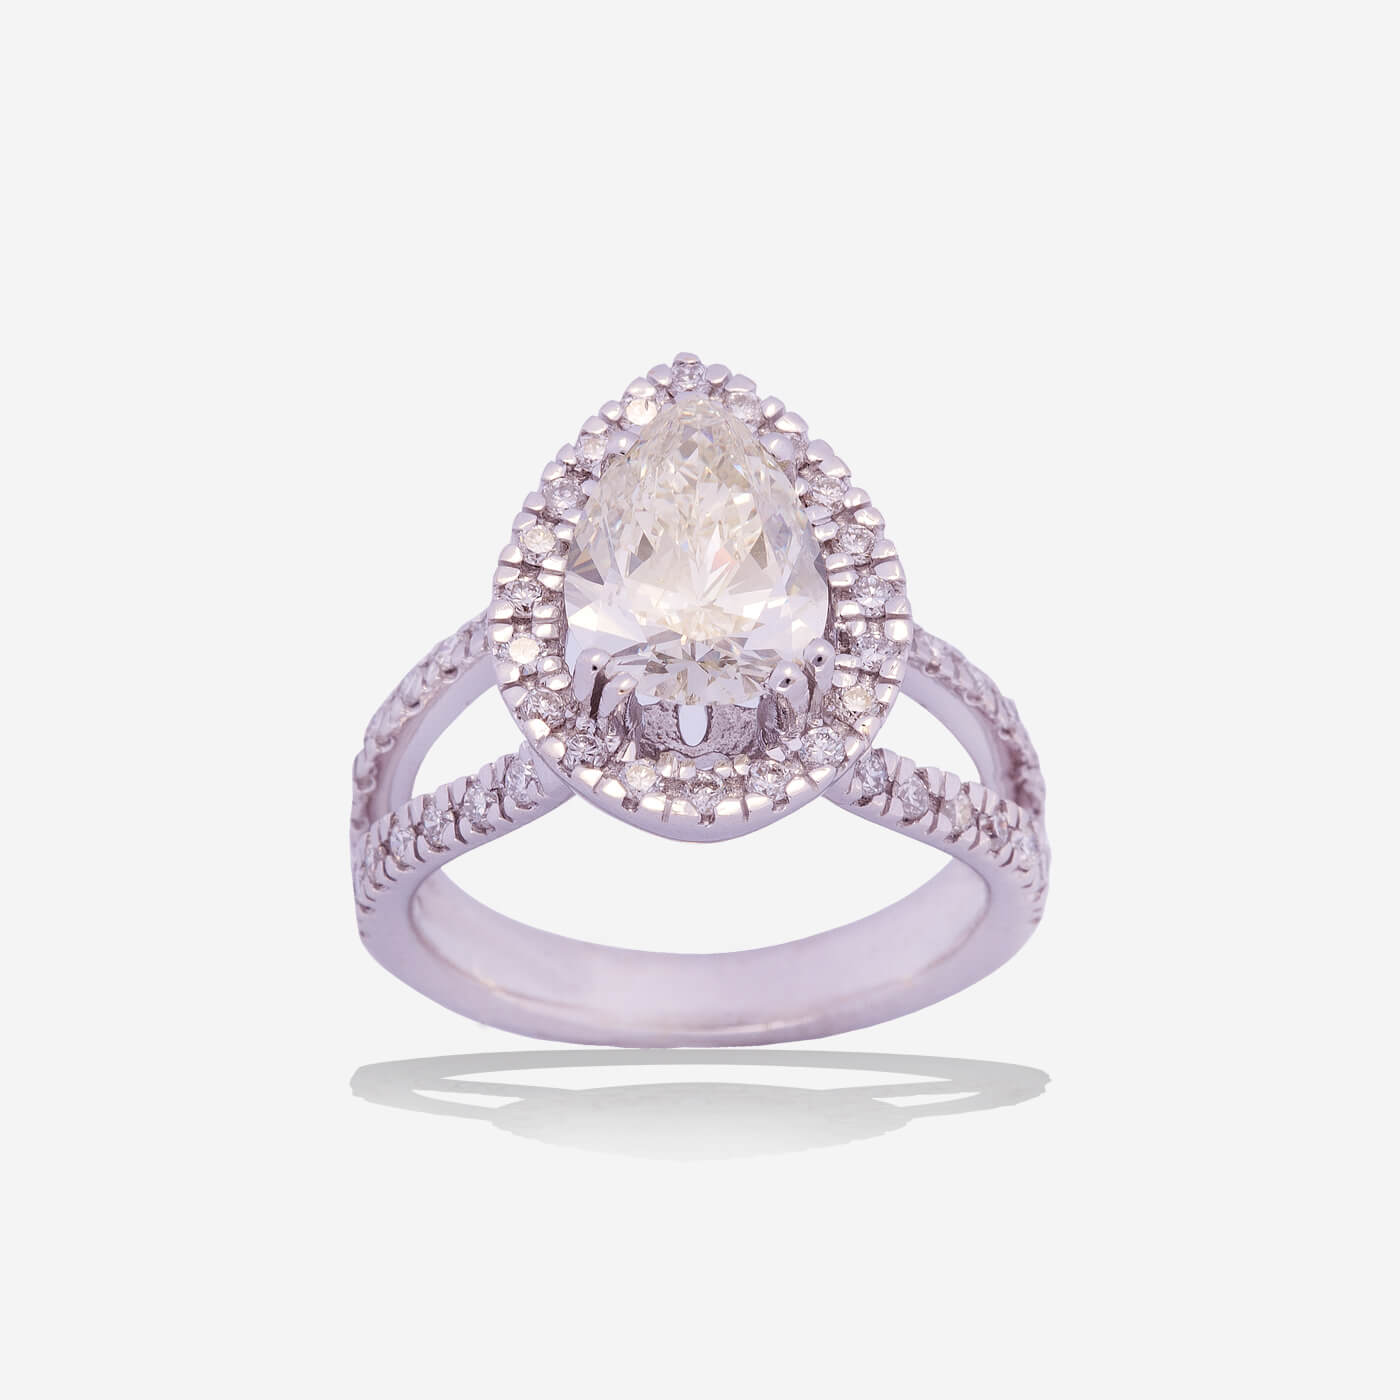 White Gold Pear Solitaire With Pave Diamonds Ring - Ref: RY03695